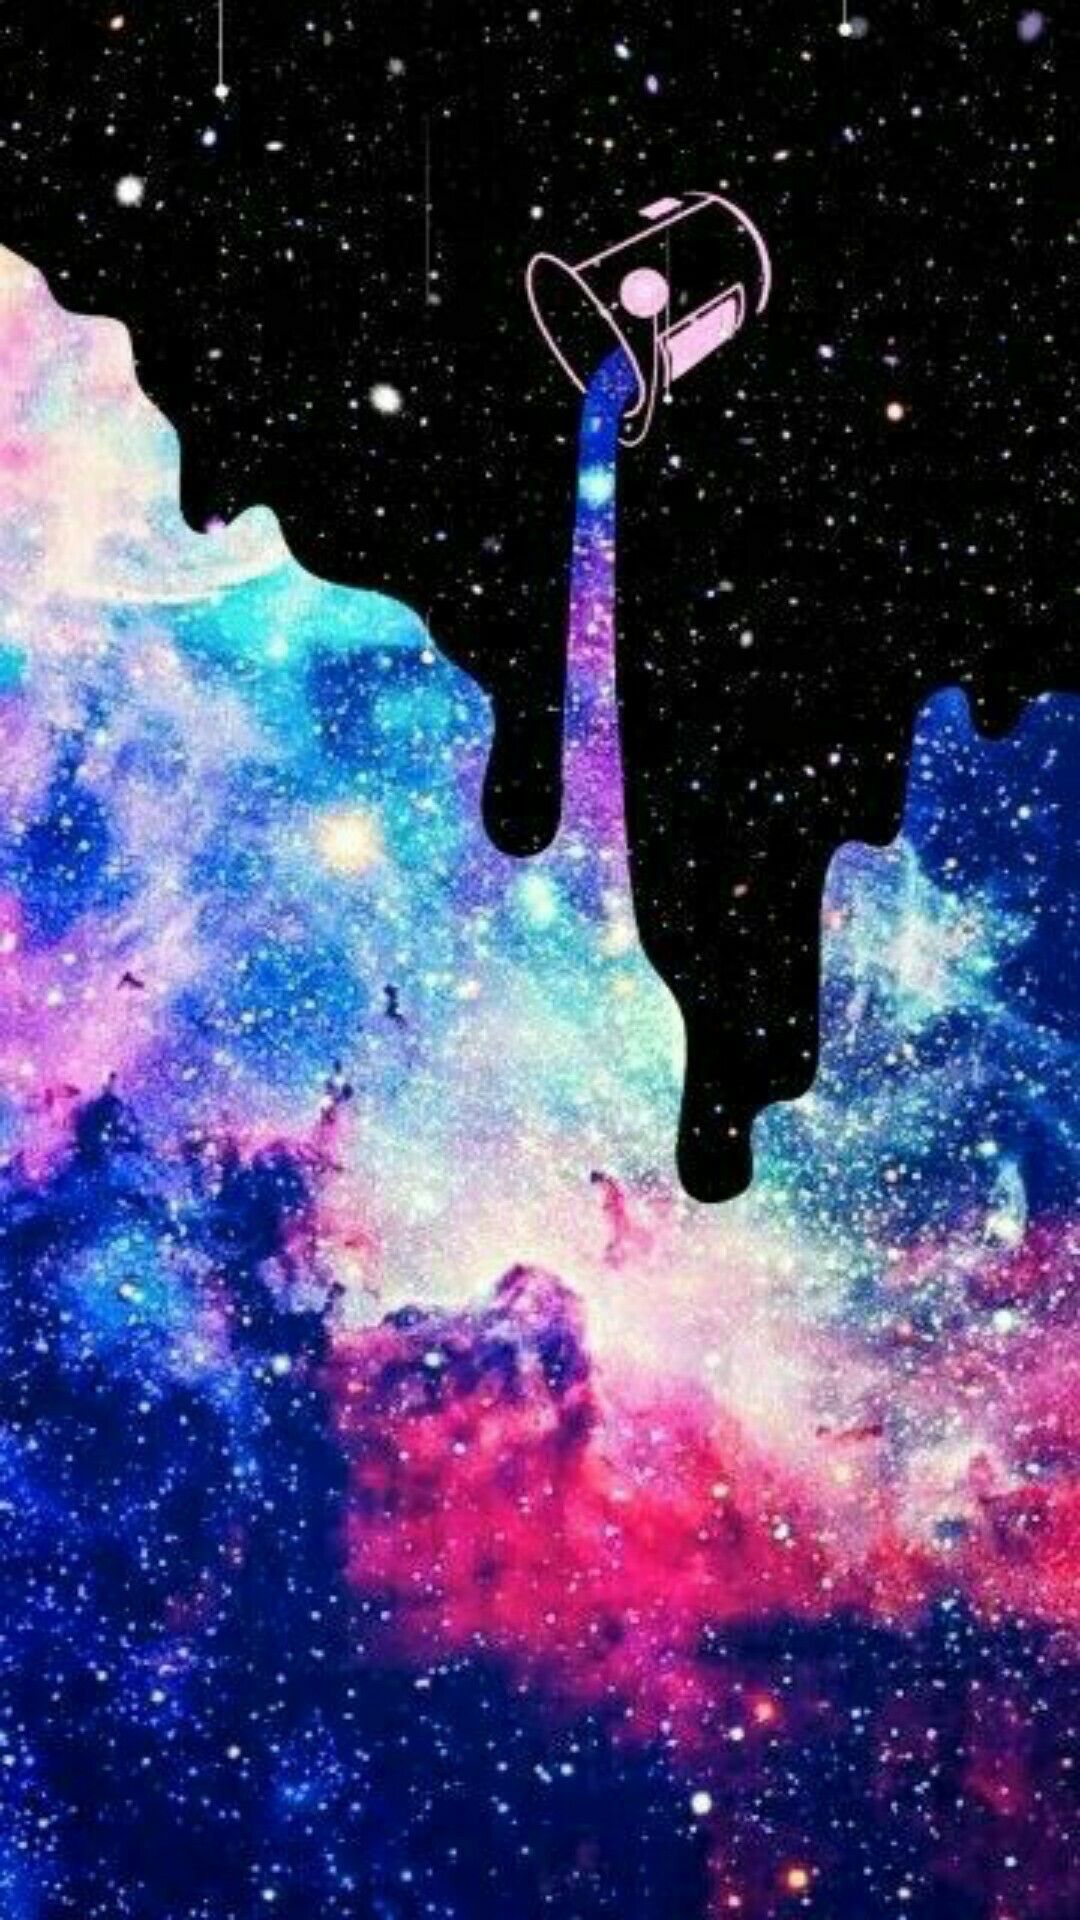 Space, Graphic design, Illustration, Outer space, Font, Galaxy. Art wallpaper iphone, Wallpaper space, Wallpaper iphone cute